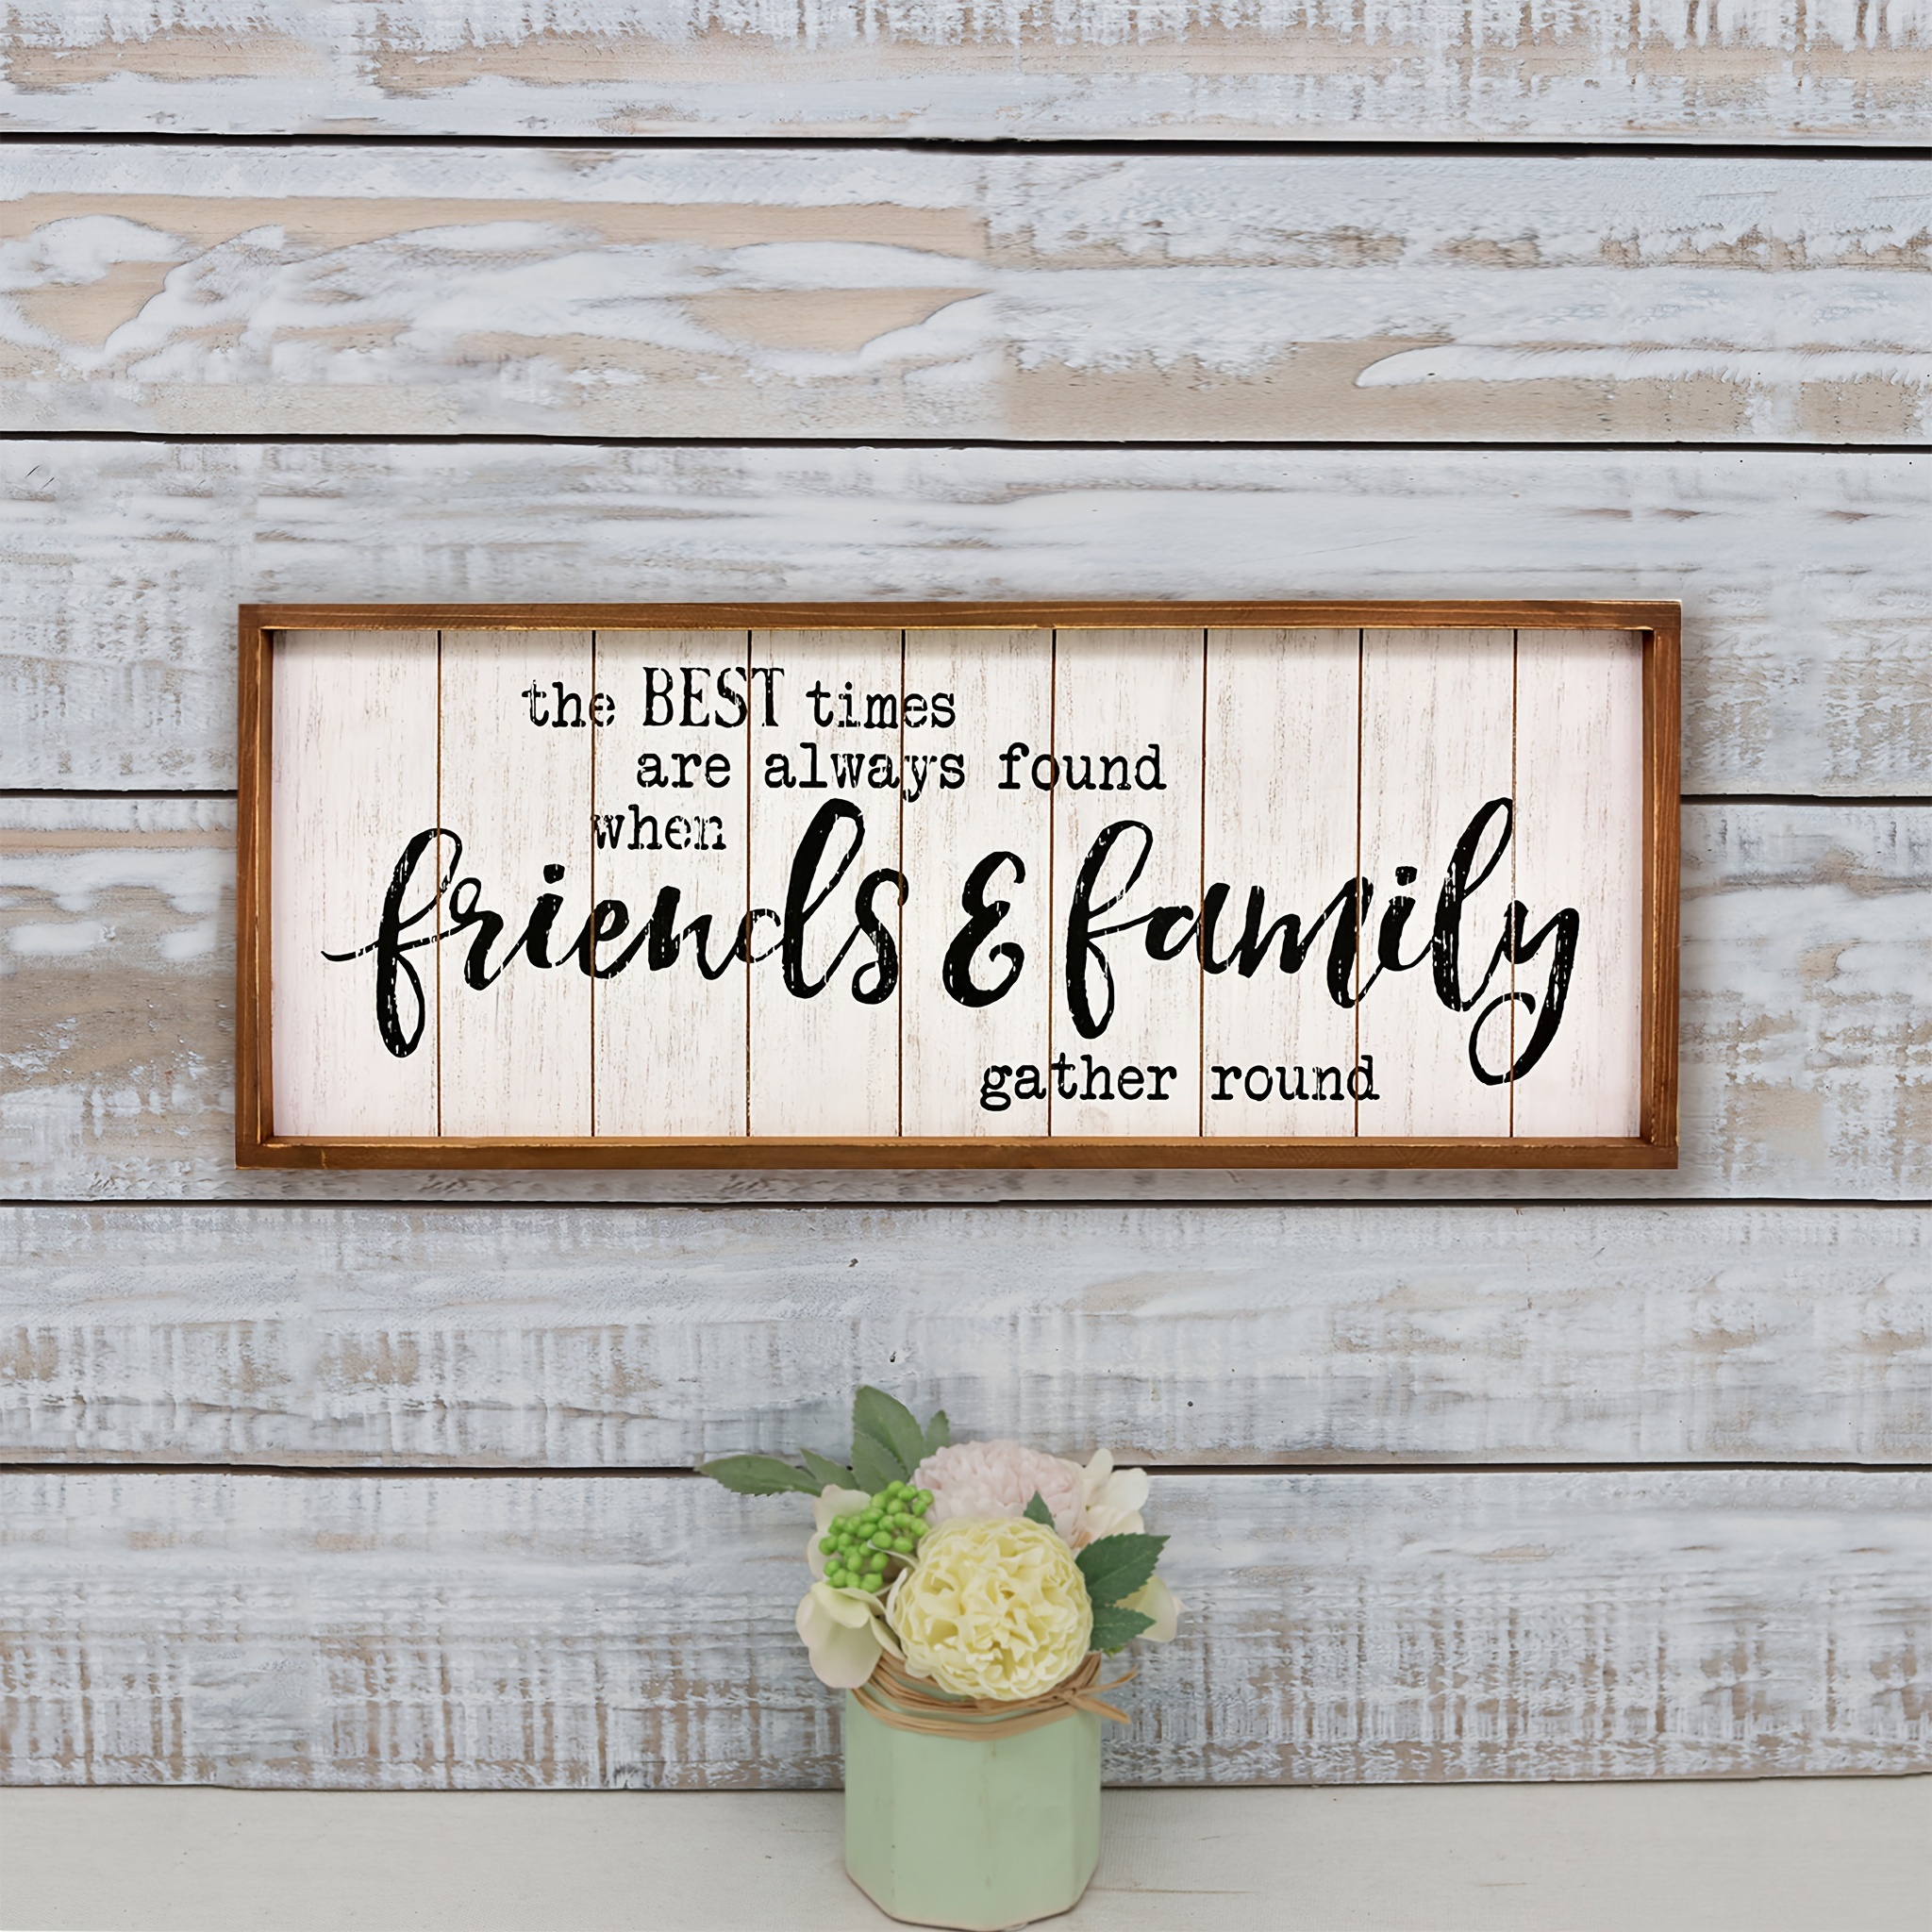 

The Best Times Are Always Found When Friends&family Gather Round Rustic Wood Signs, Vantage Wooden Farmhouse Plaque, Large Wood Framed Wall Hanging Decor